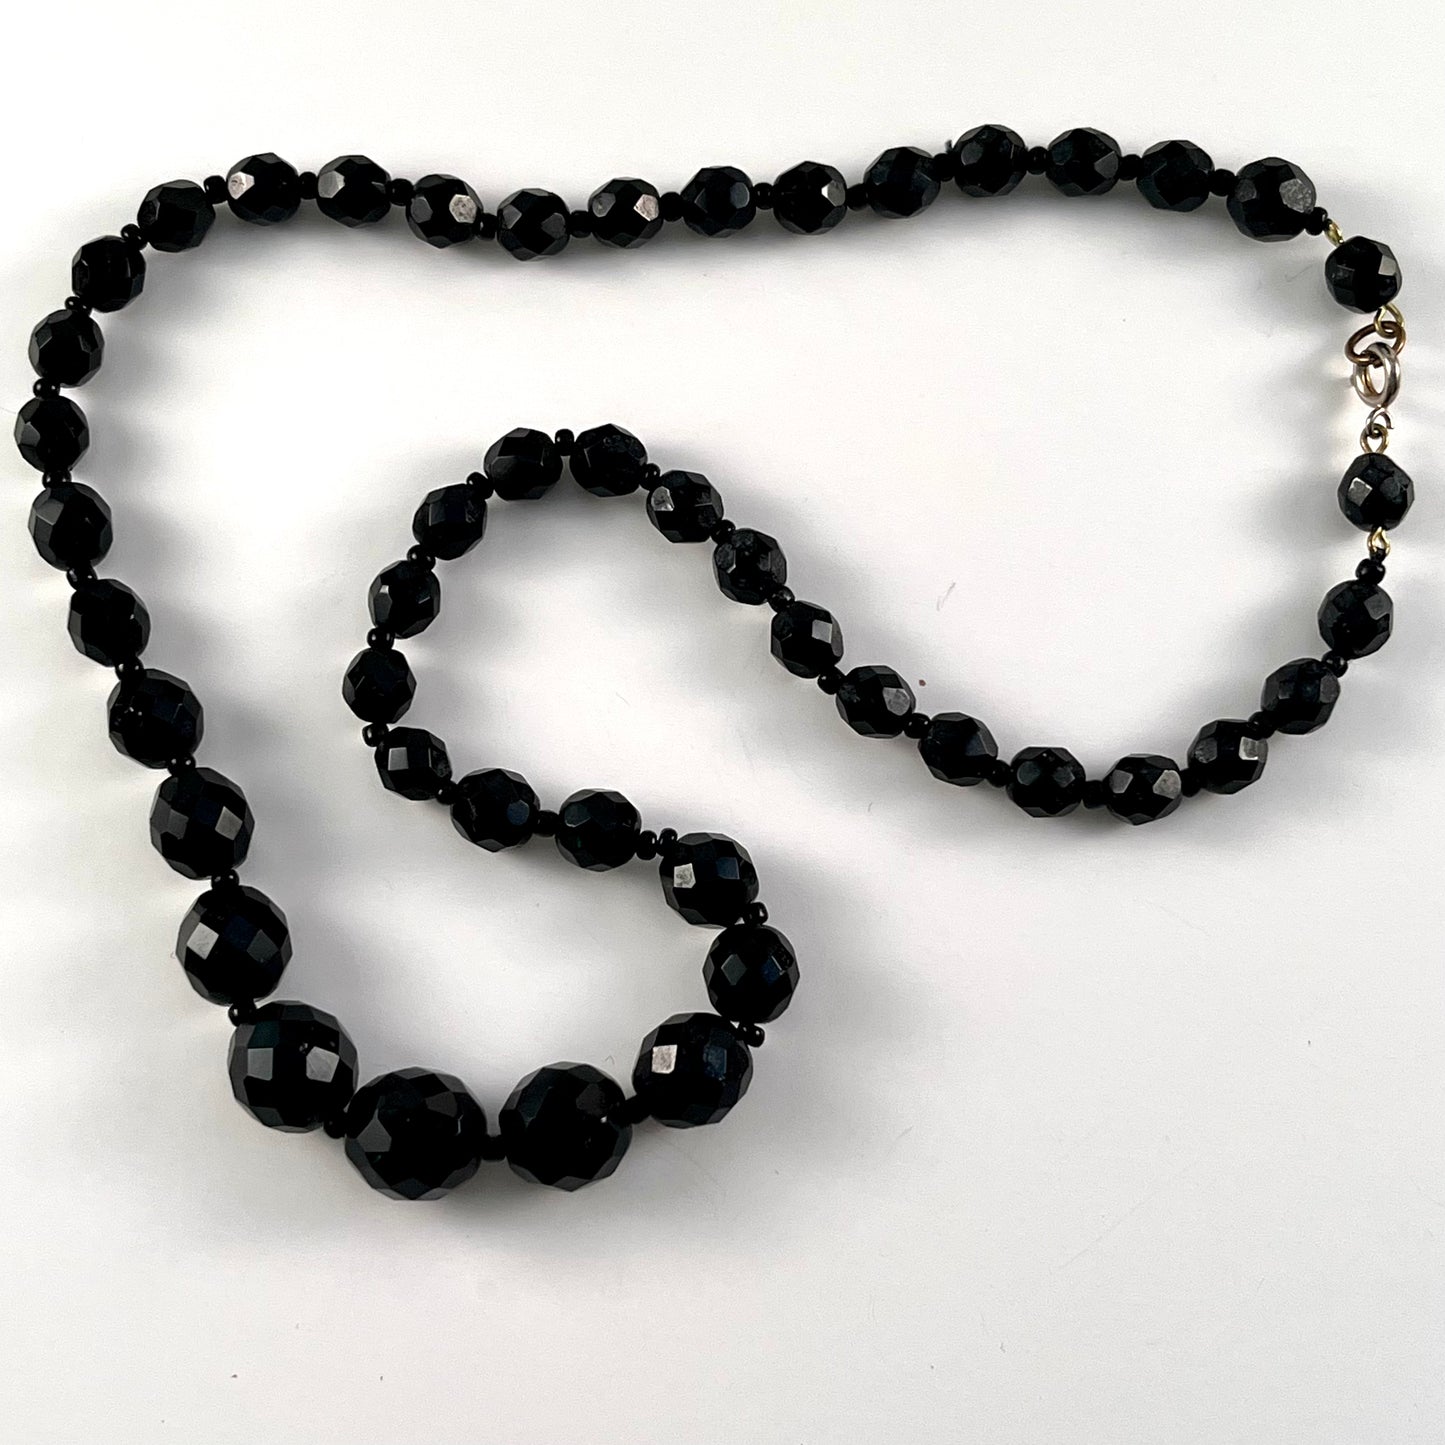 1960s Black Glass Bead Necklace